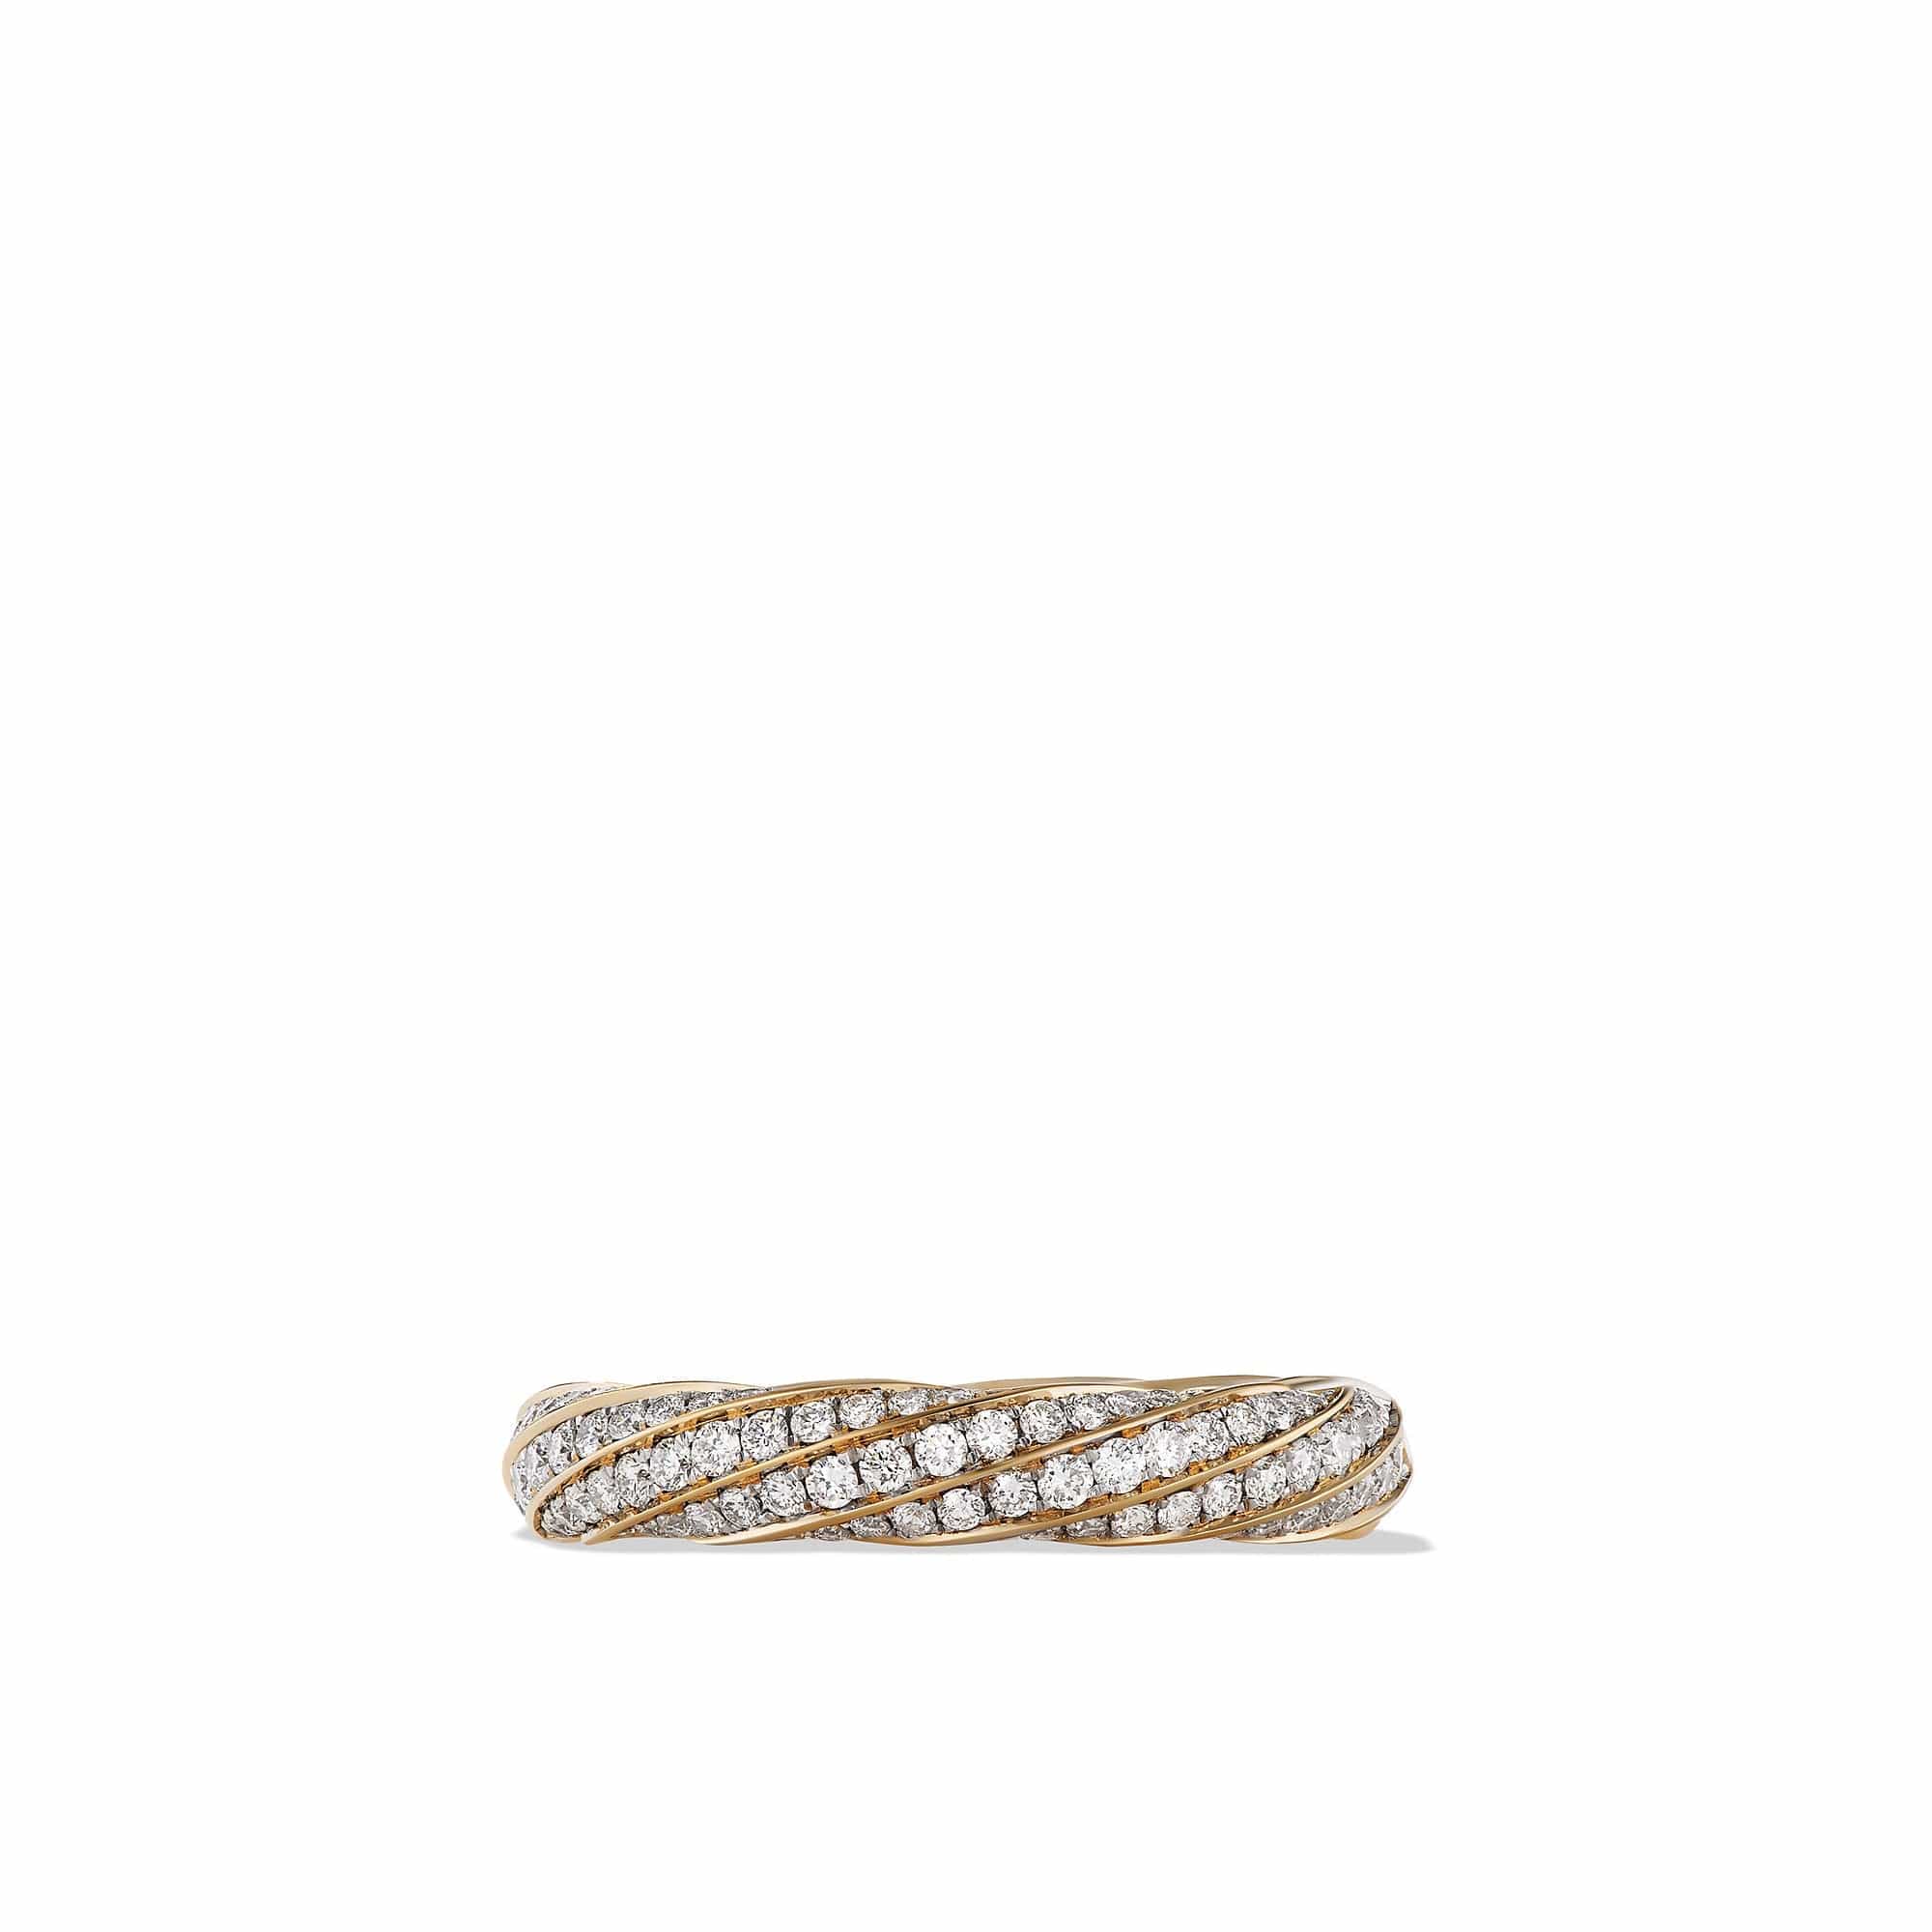 Cable Edge Band Ring in Recycled 18K Yellow Gold with Pavé Diamonds, Long's Jewelers